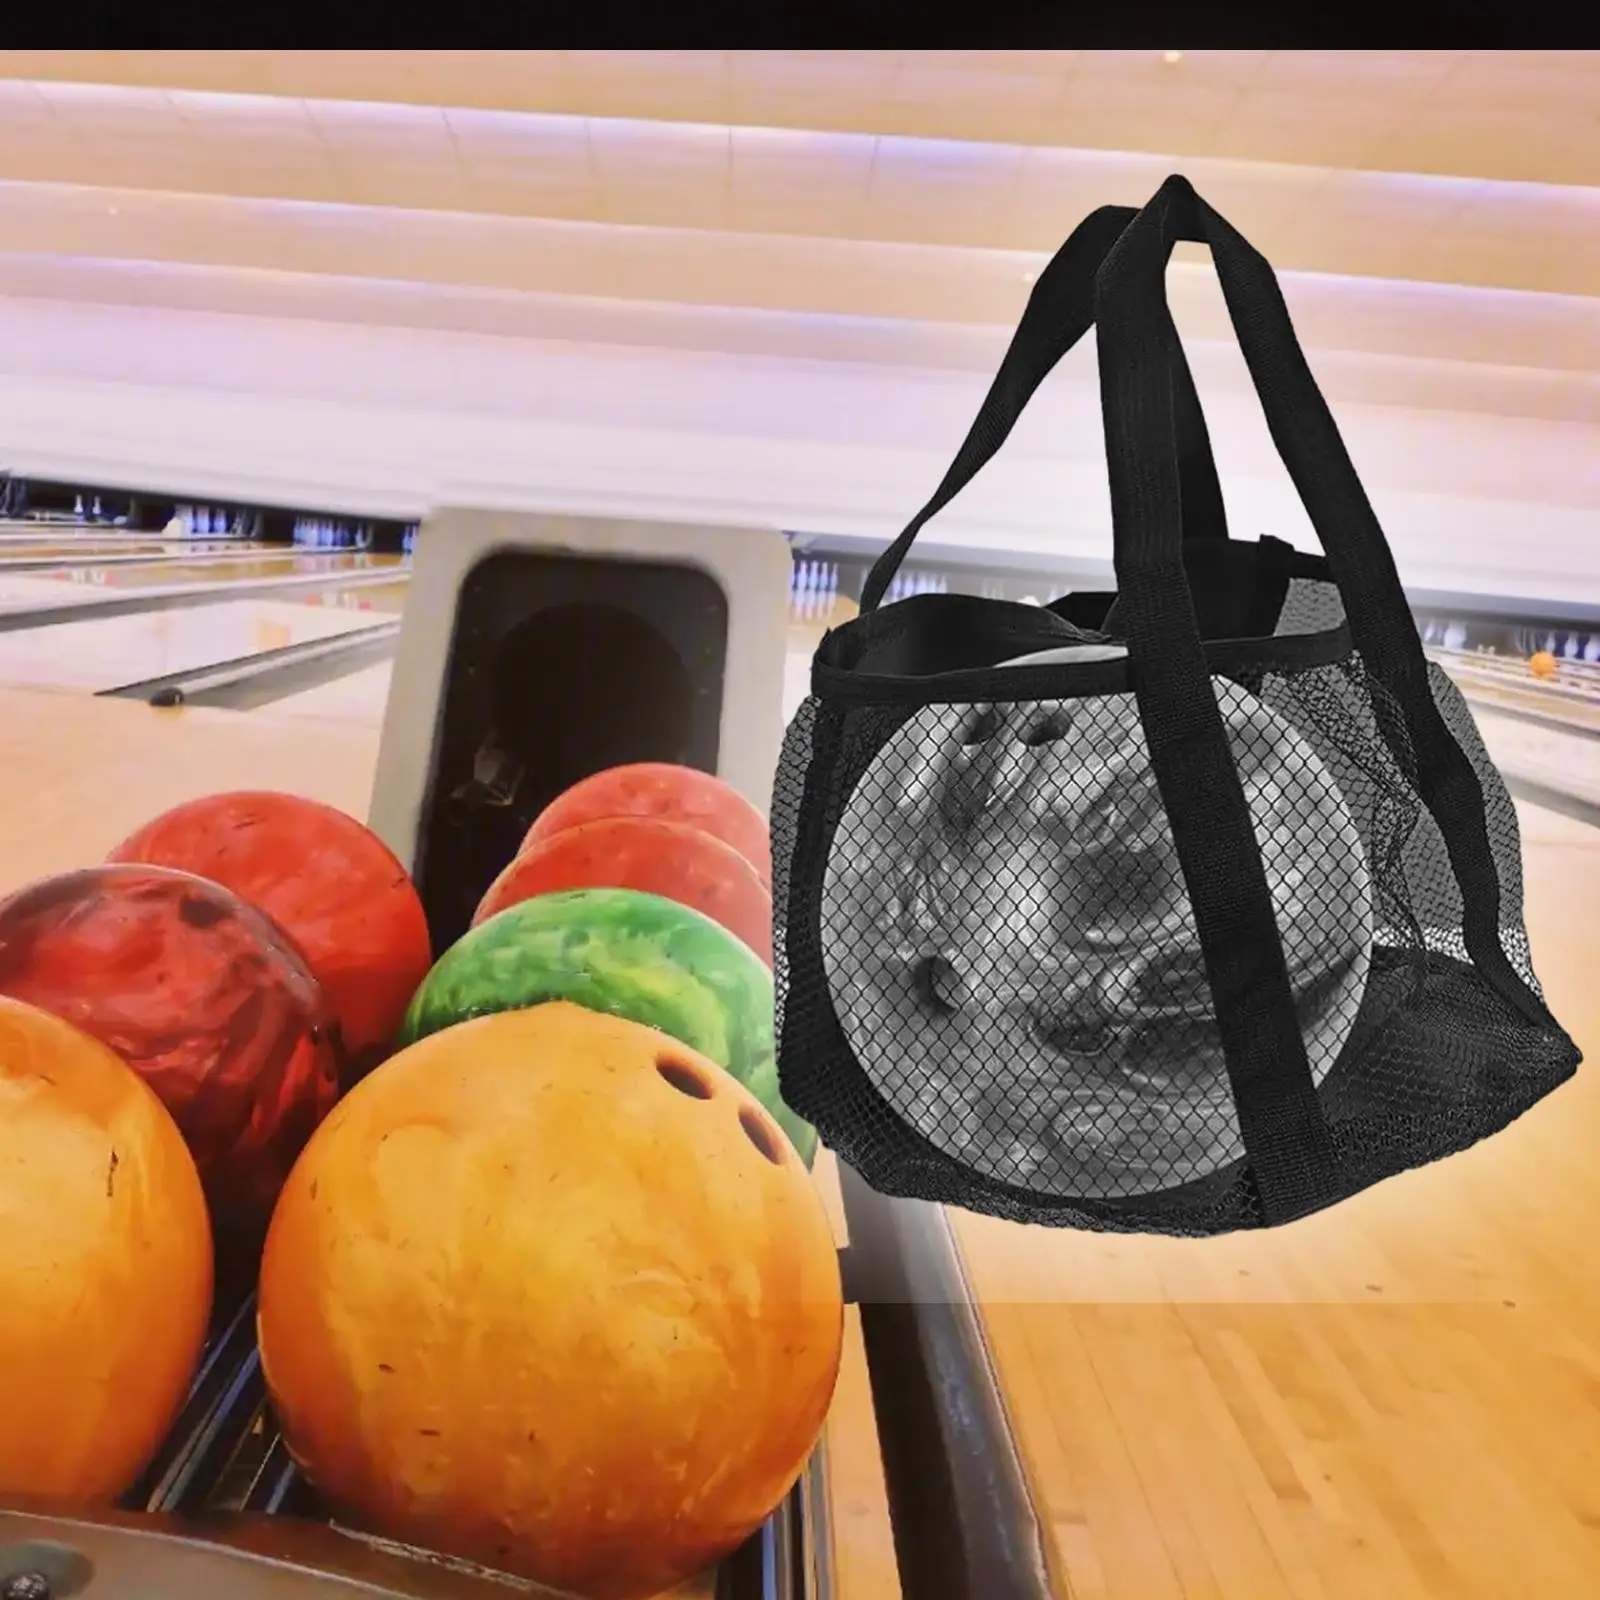 Single Bowling Ball Bag Portable Durable Bowling Ball Holder Container Case for Gym Outdoor Sports Training Women Men Practice